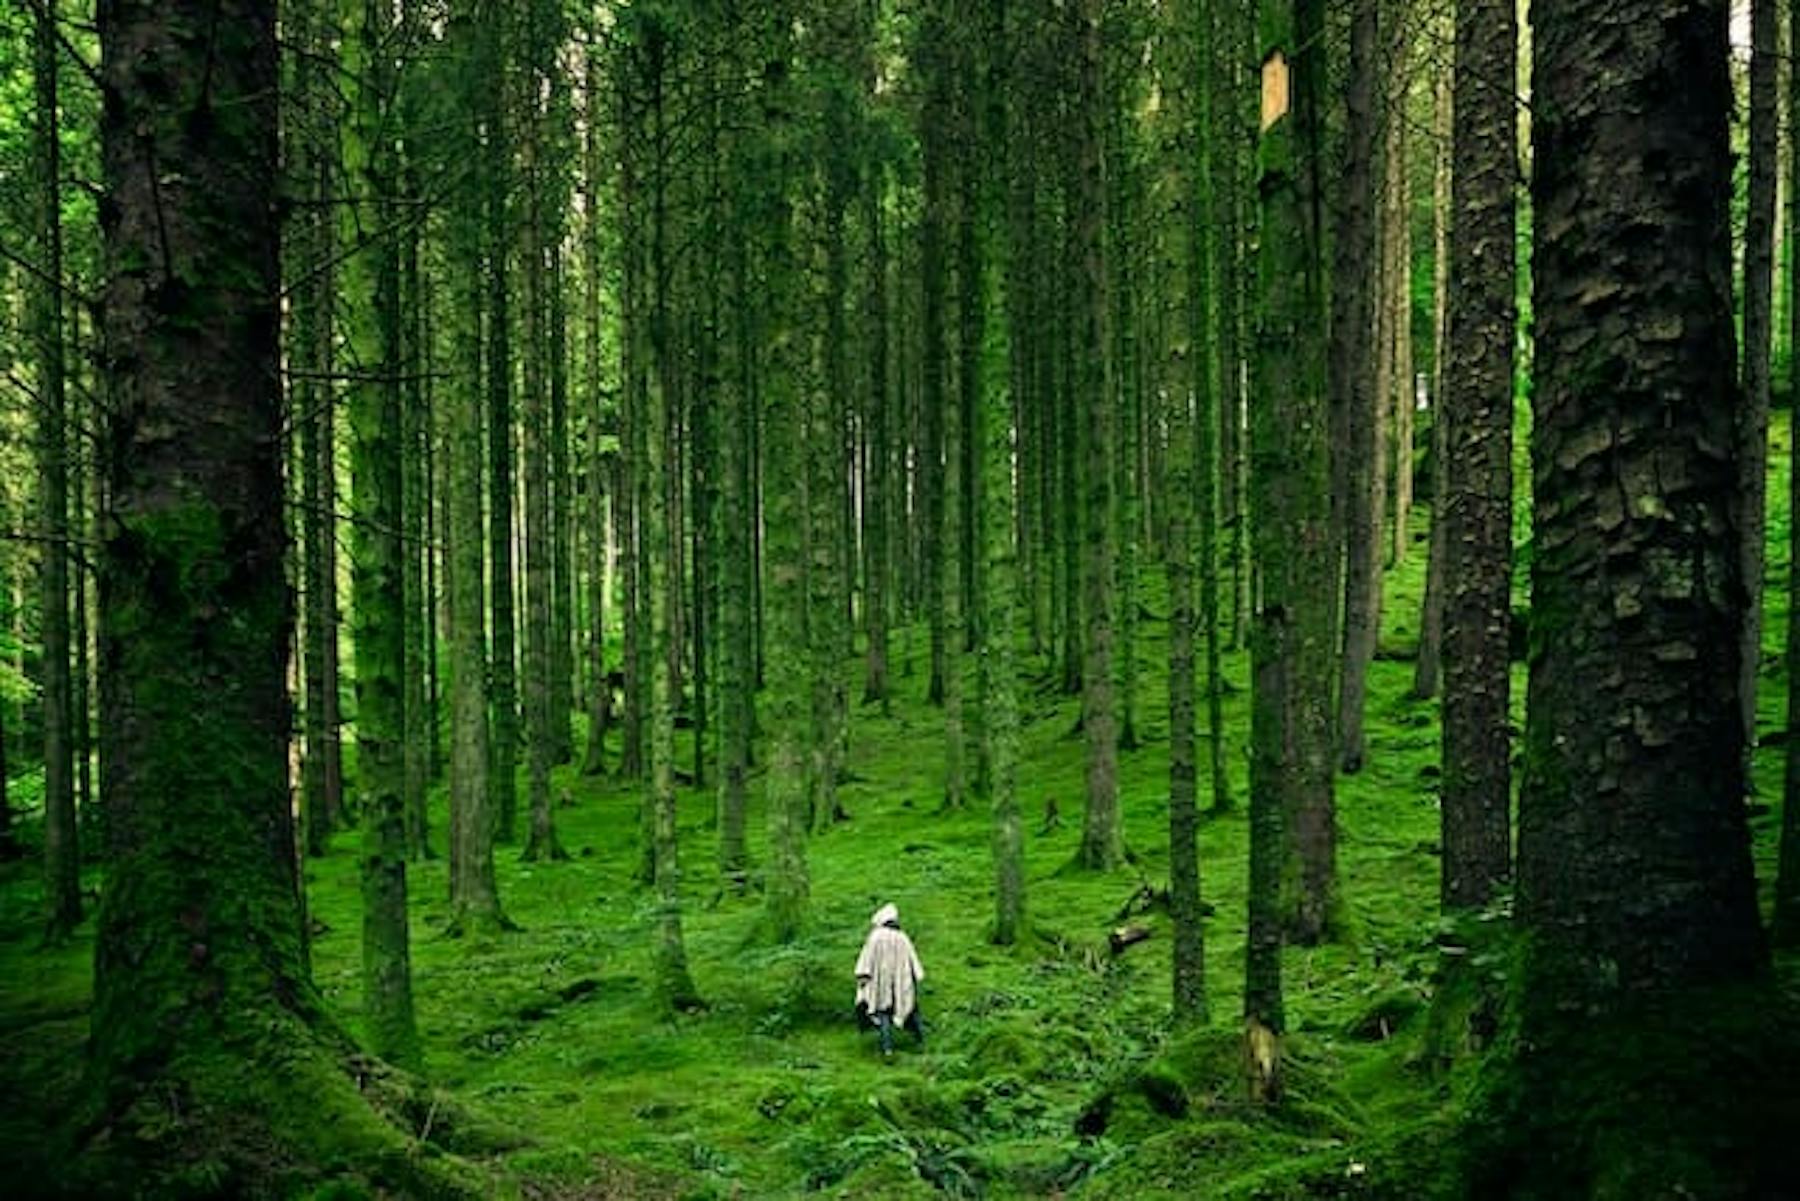 A person walking in a green forest